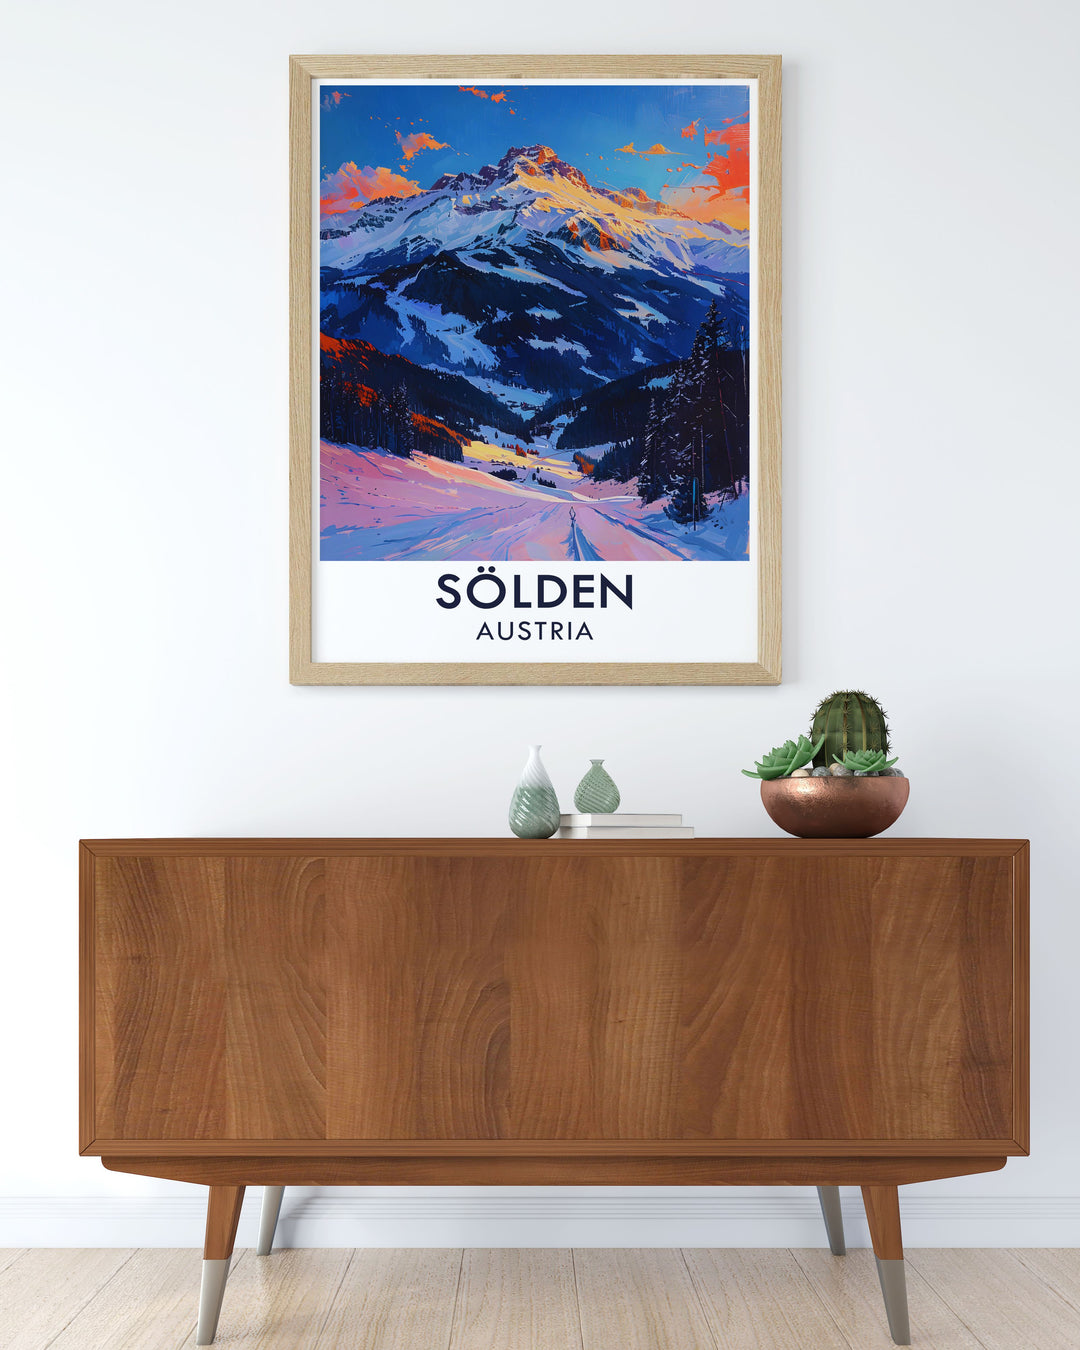 Solden Ski Resort is beautifully illustrated in this poster, highlighting its dynamic slopes and pristine snow, making it an excellent addition for anyone who dreams of an exhilarating winter escape.